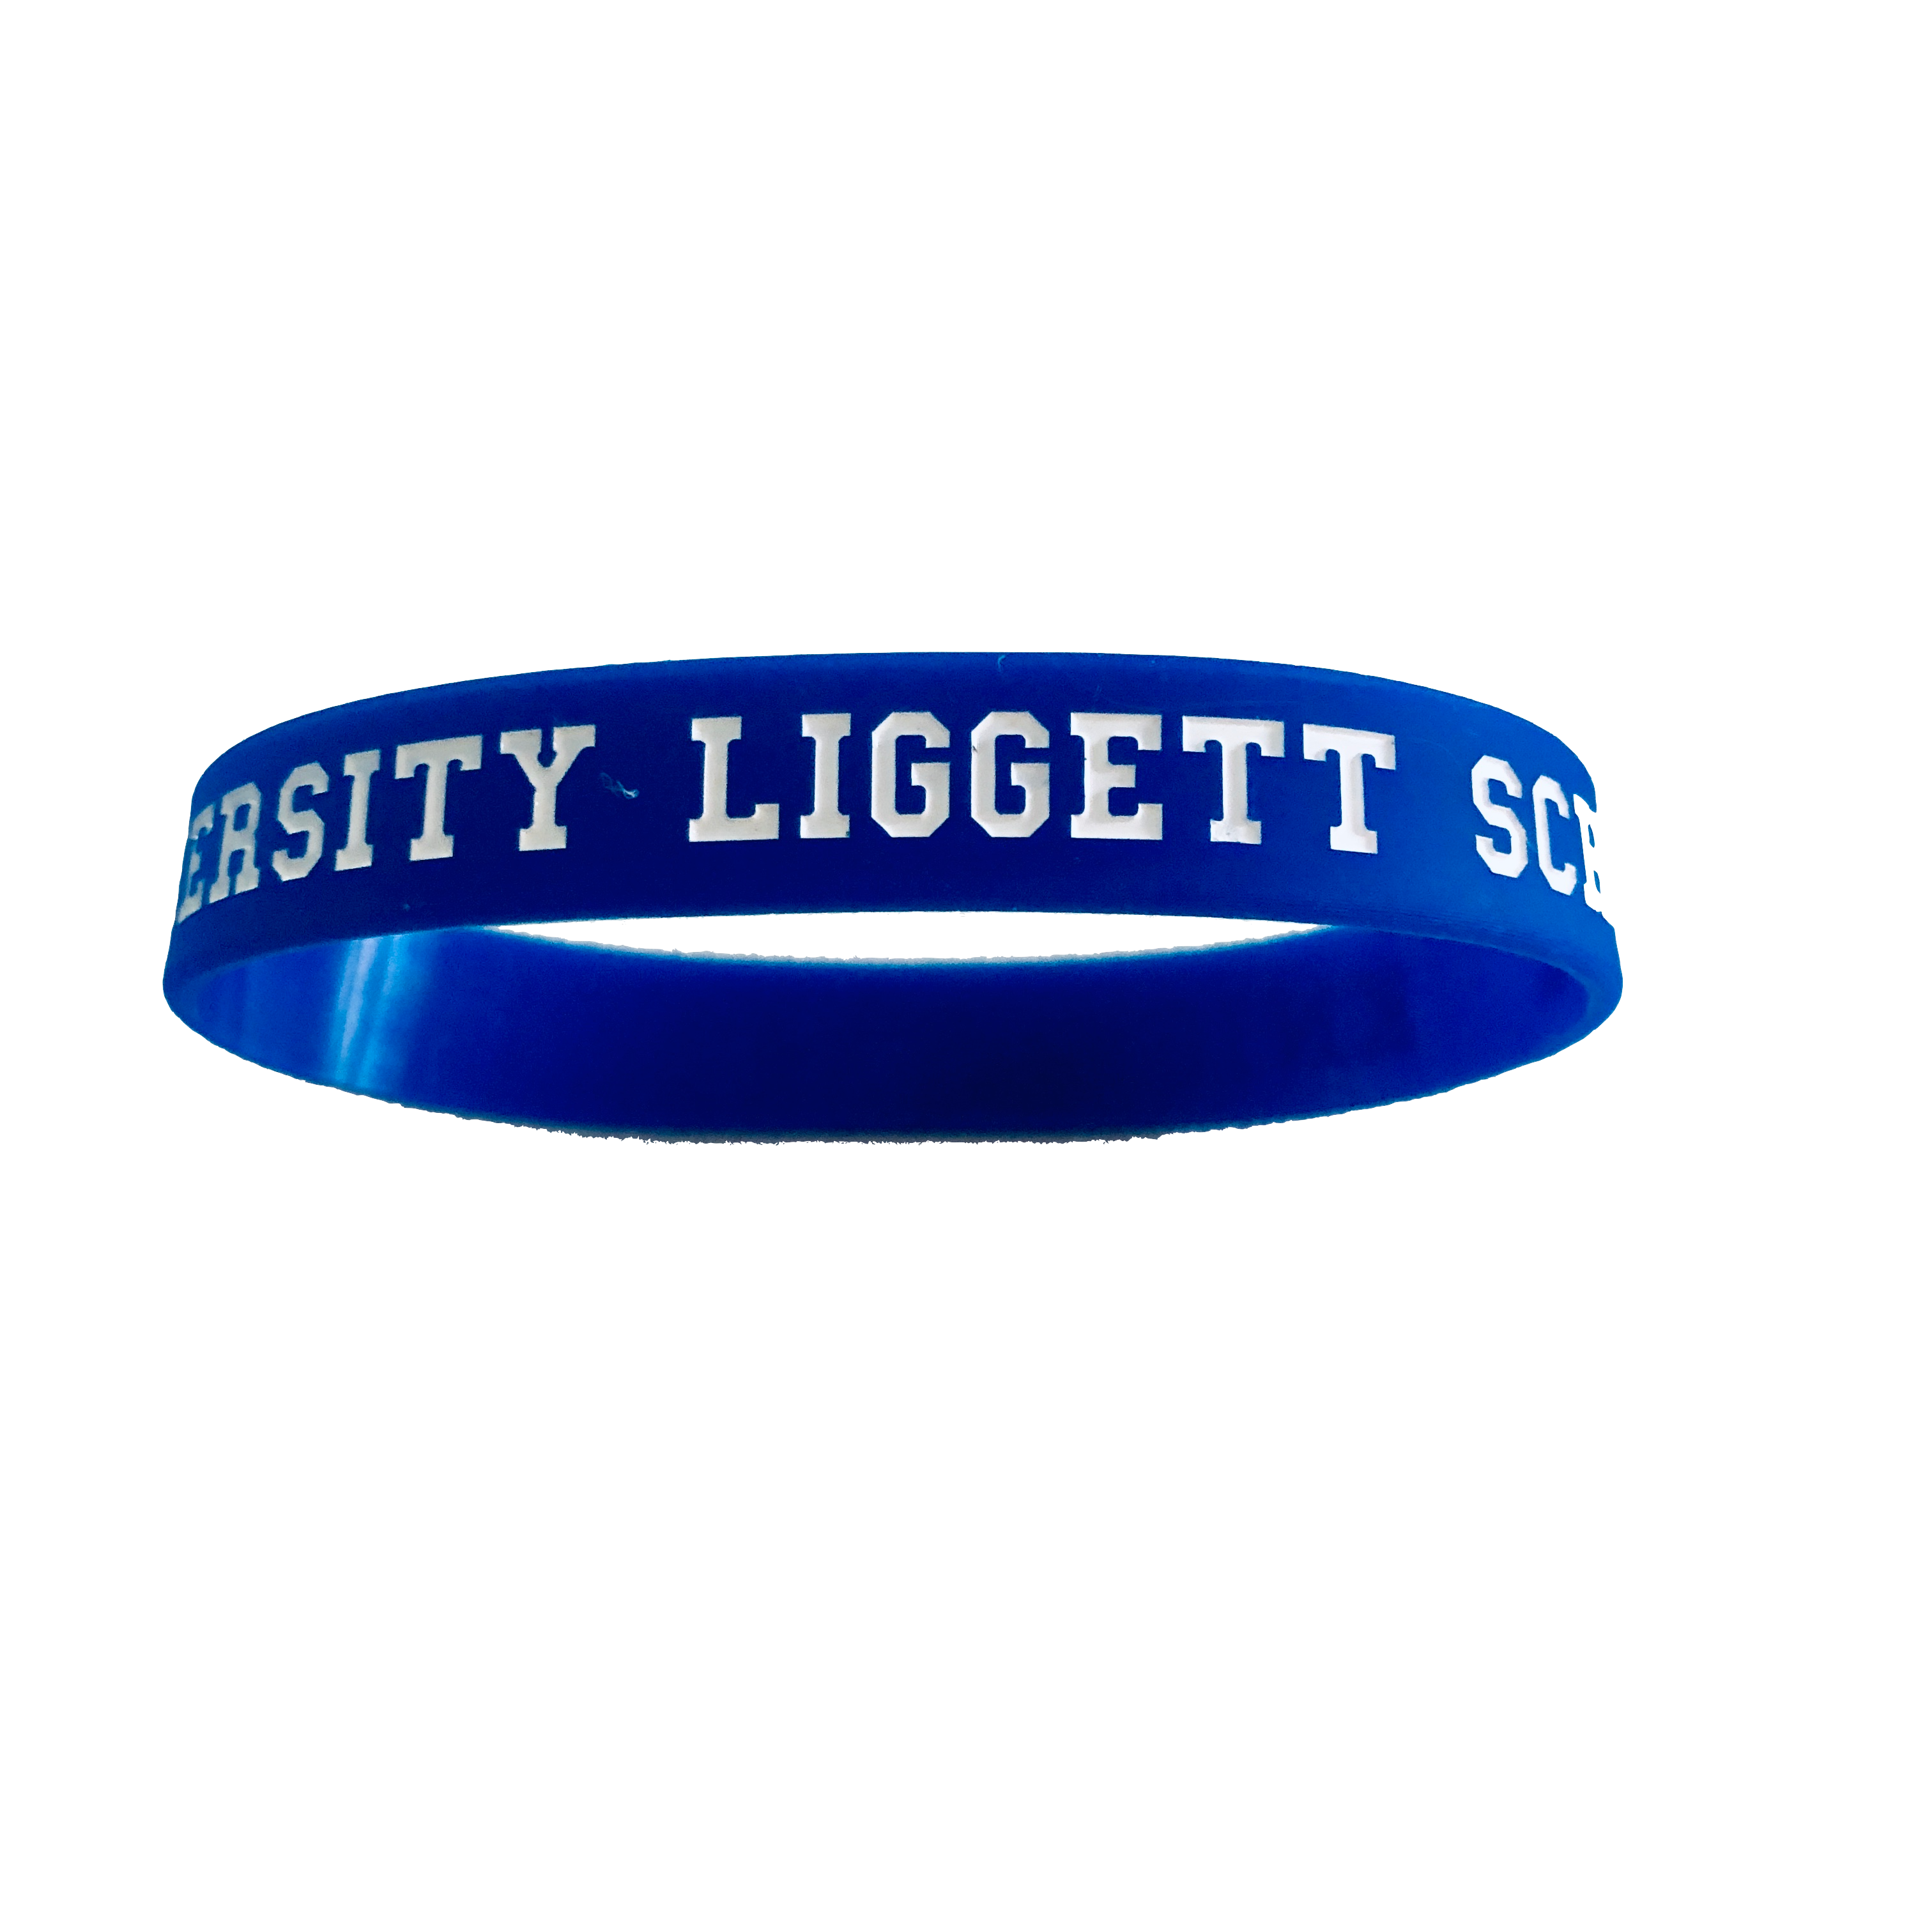 KNIGHT STRONG Wristband